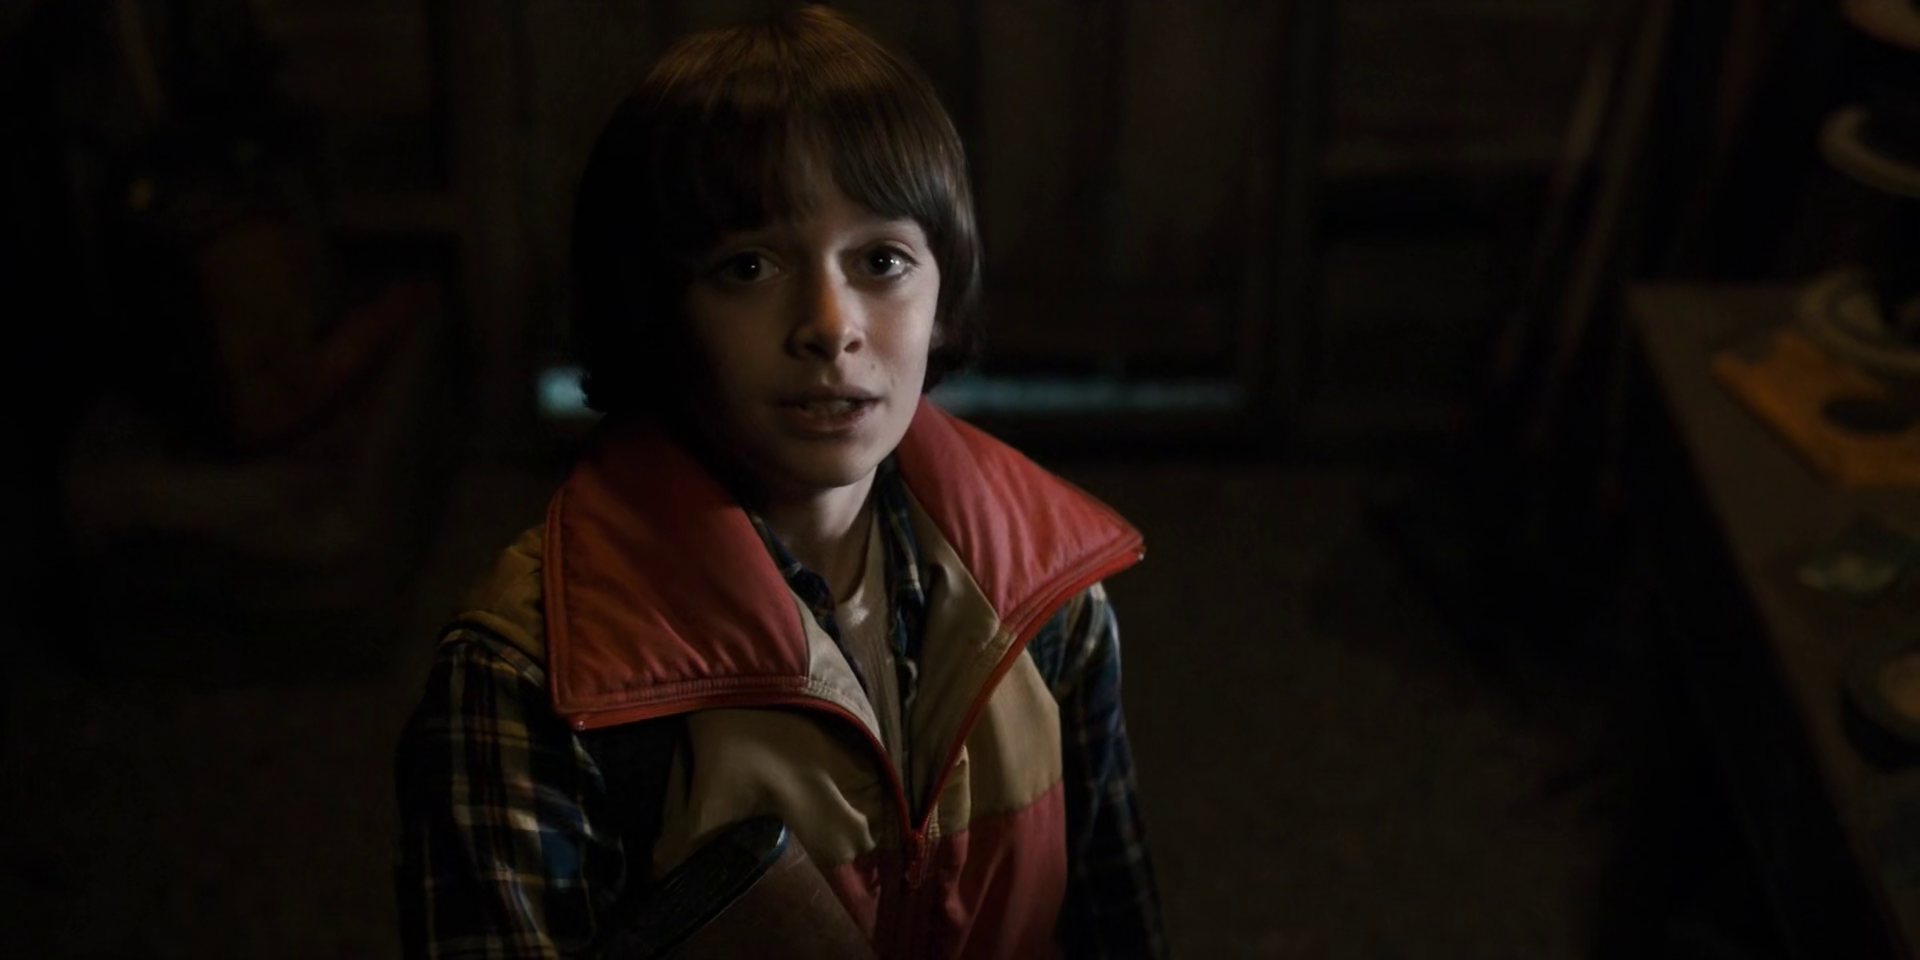 stranger things season 2 episode 1 fans are not happy